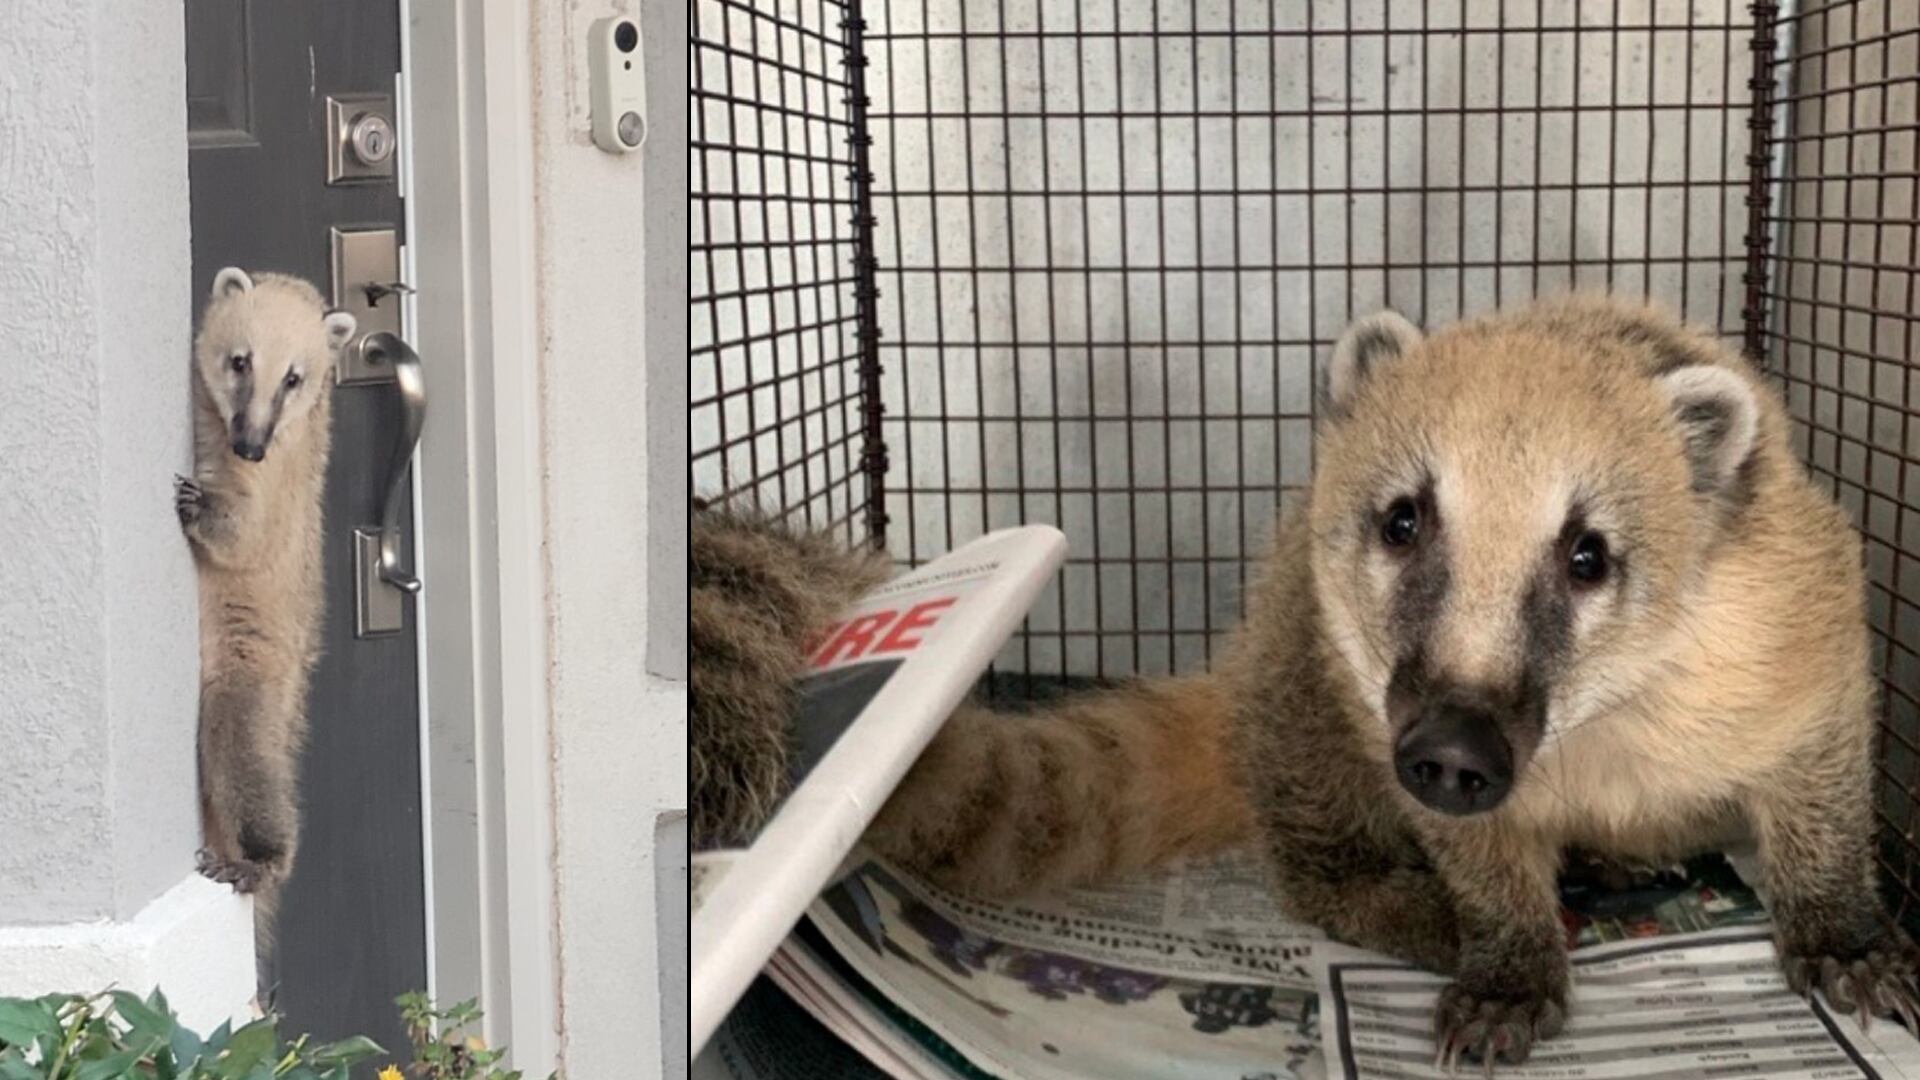 A San Antonio man recently found a rare, furry creature clinging to his front porch. (Photos provided by Animal Care Services.)